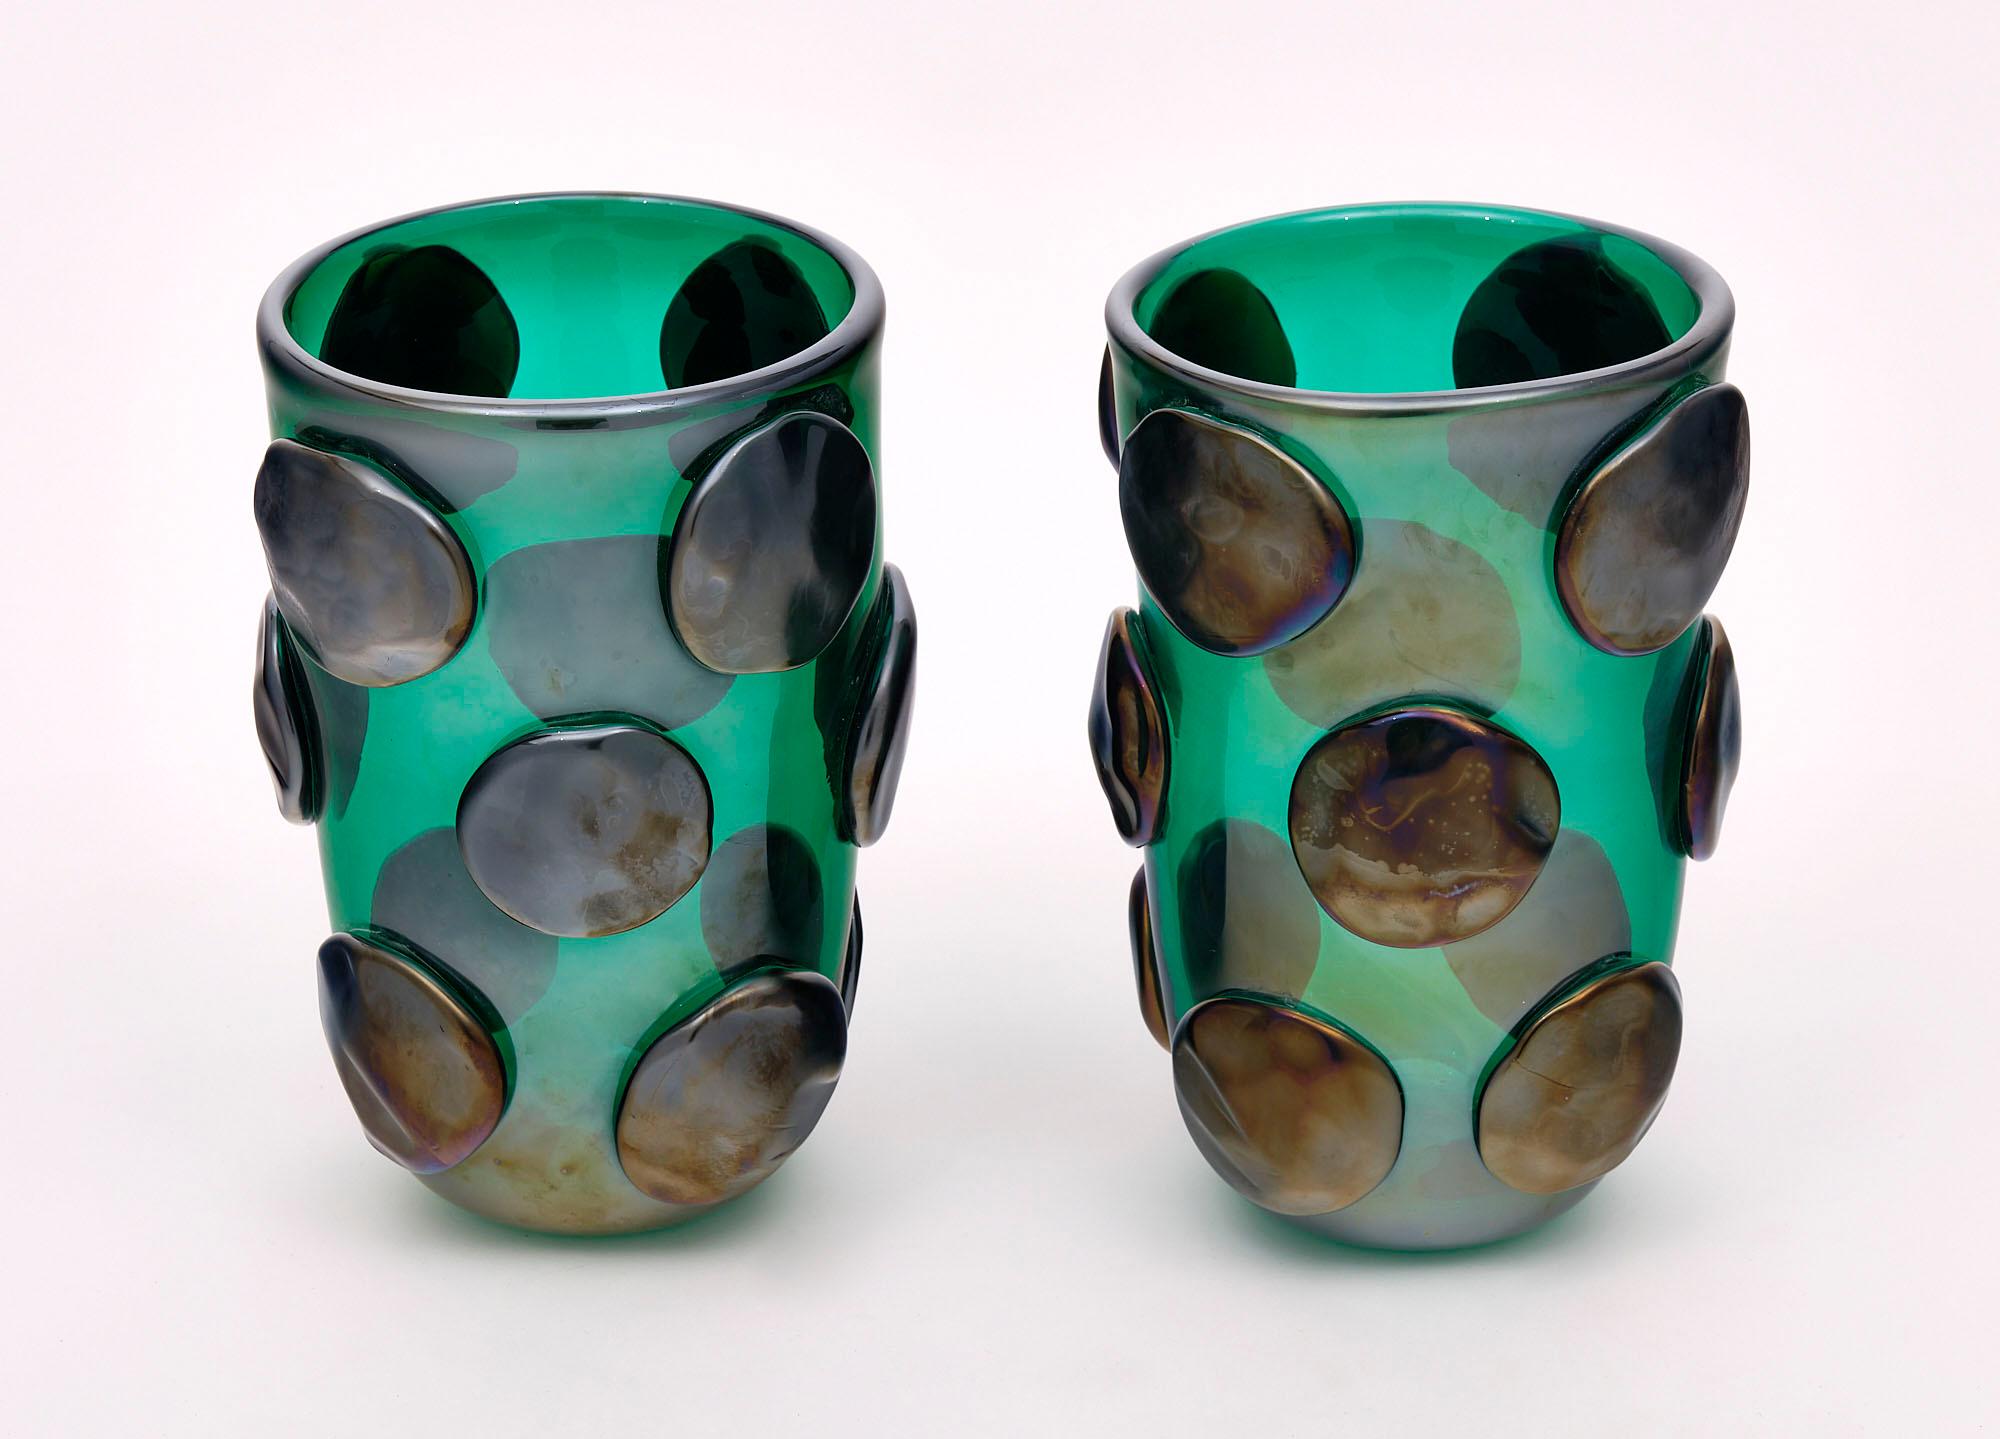 Pair of vases from the island of Murano featuring a deep teal green color with iridescent bronze medallions applied during the fusion process.